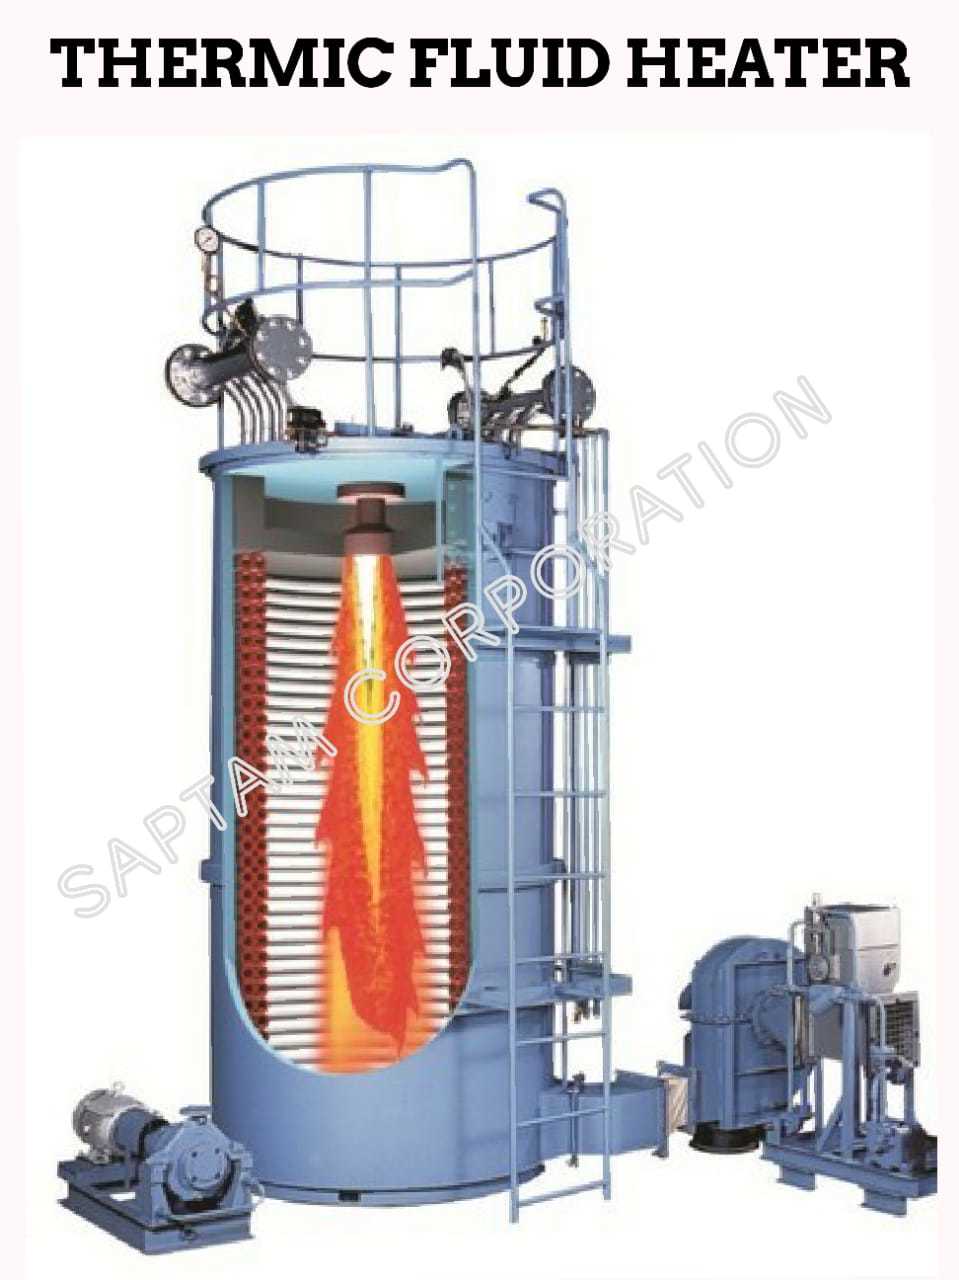 GAS THERMIC FLUID HEATER